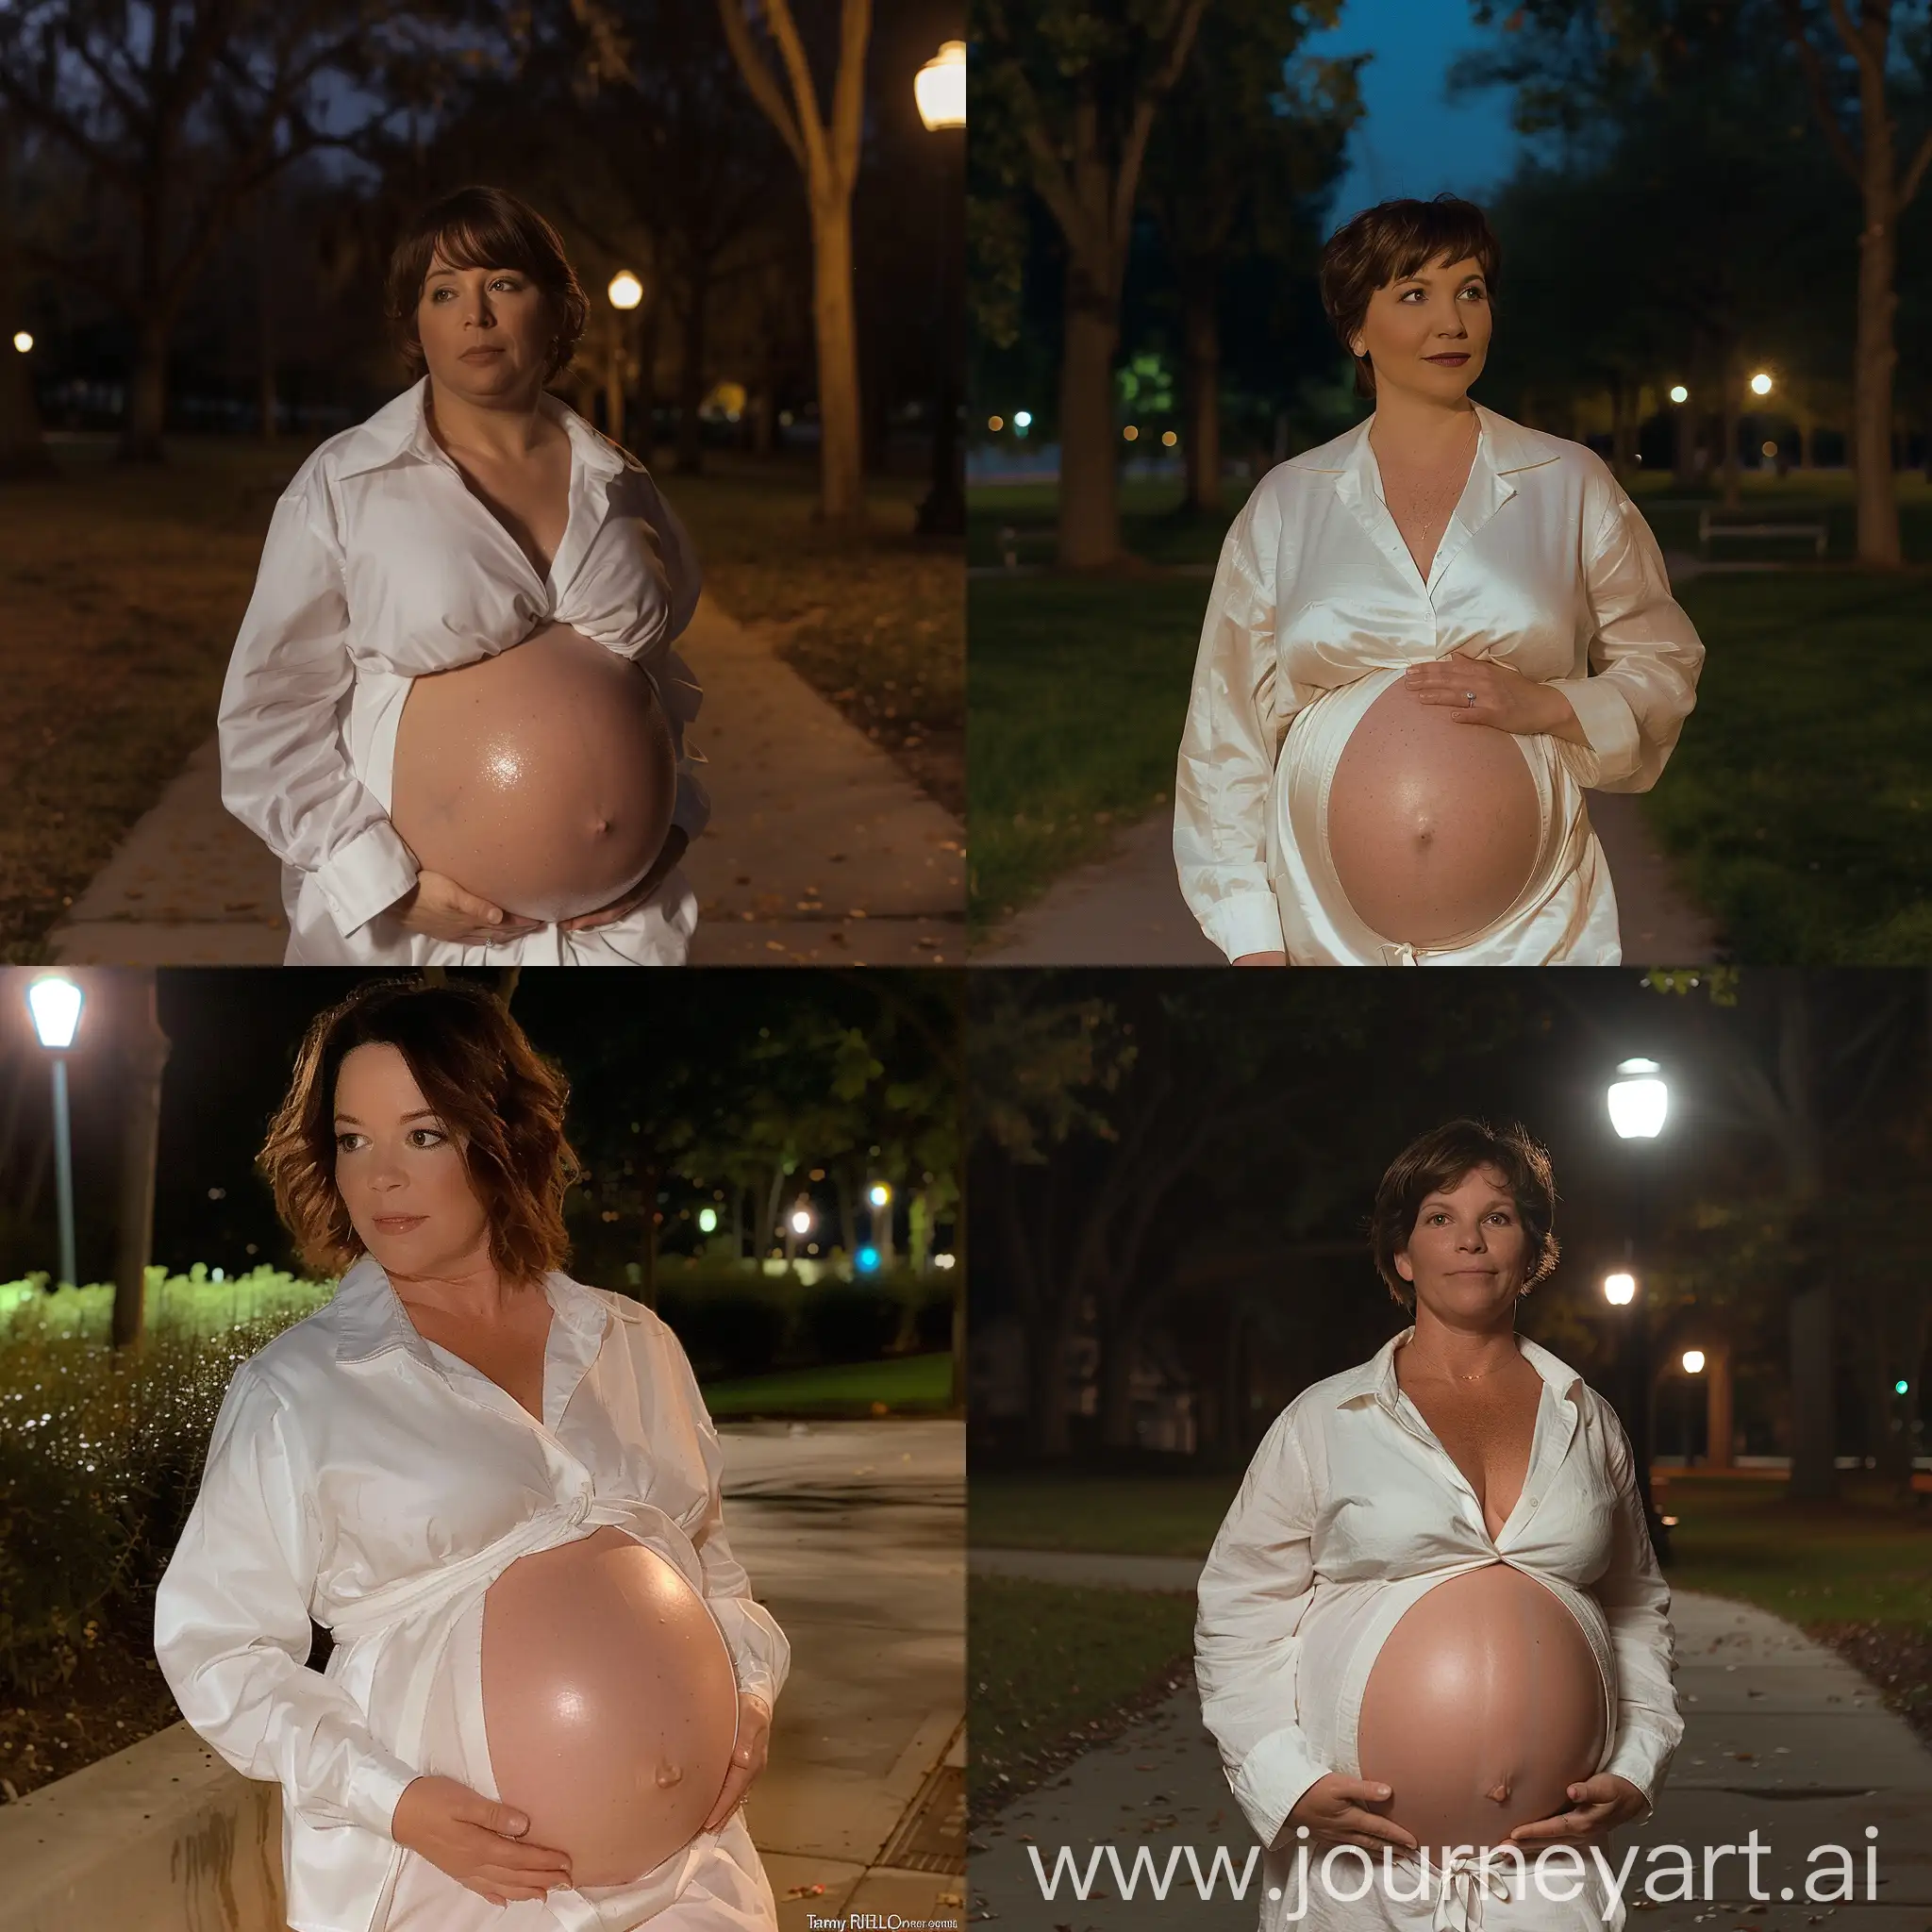 28 year old Tammy Riddle. She is 6'0" in height, Caucasian, Has short brown hair and brown eyes. She wears a white button up gown. She is walking through a park at night, While 9 months pregnant with Twins. Her pregnant belly is very large. bare belly.